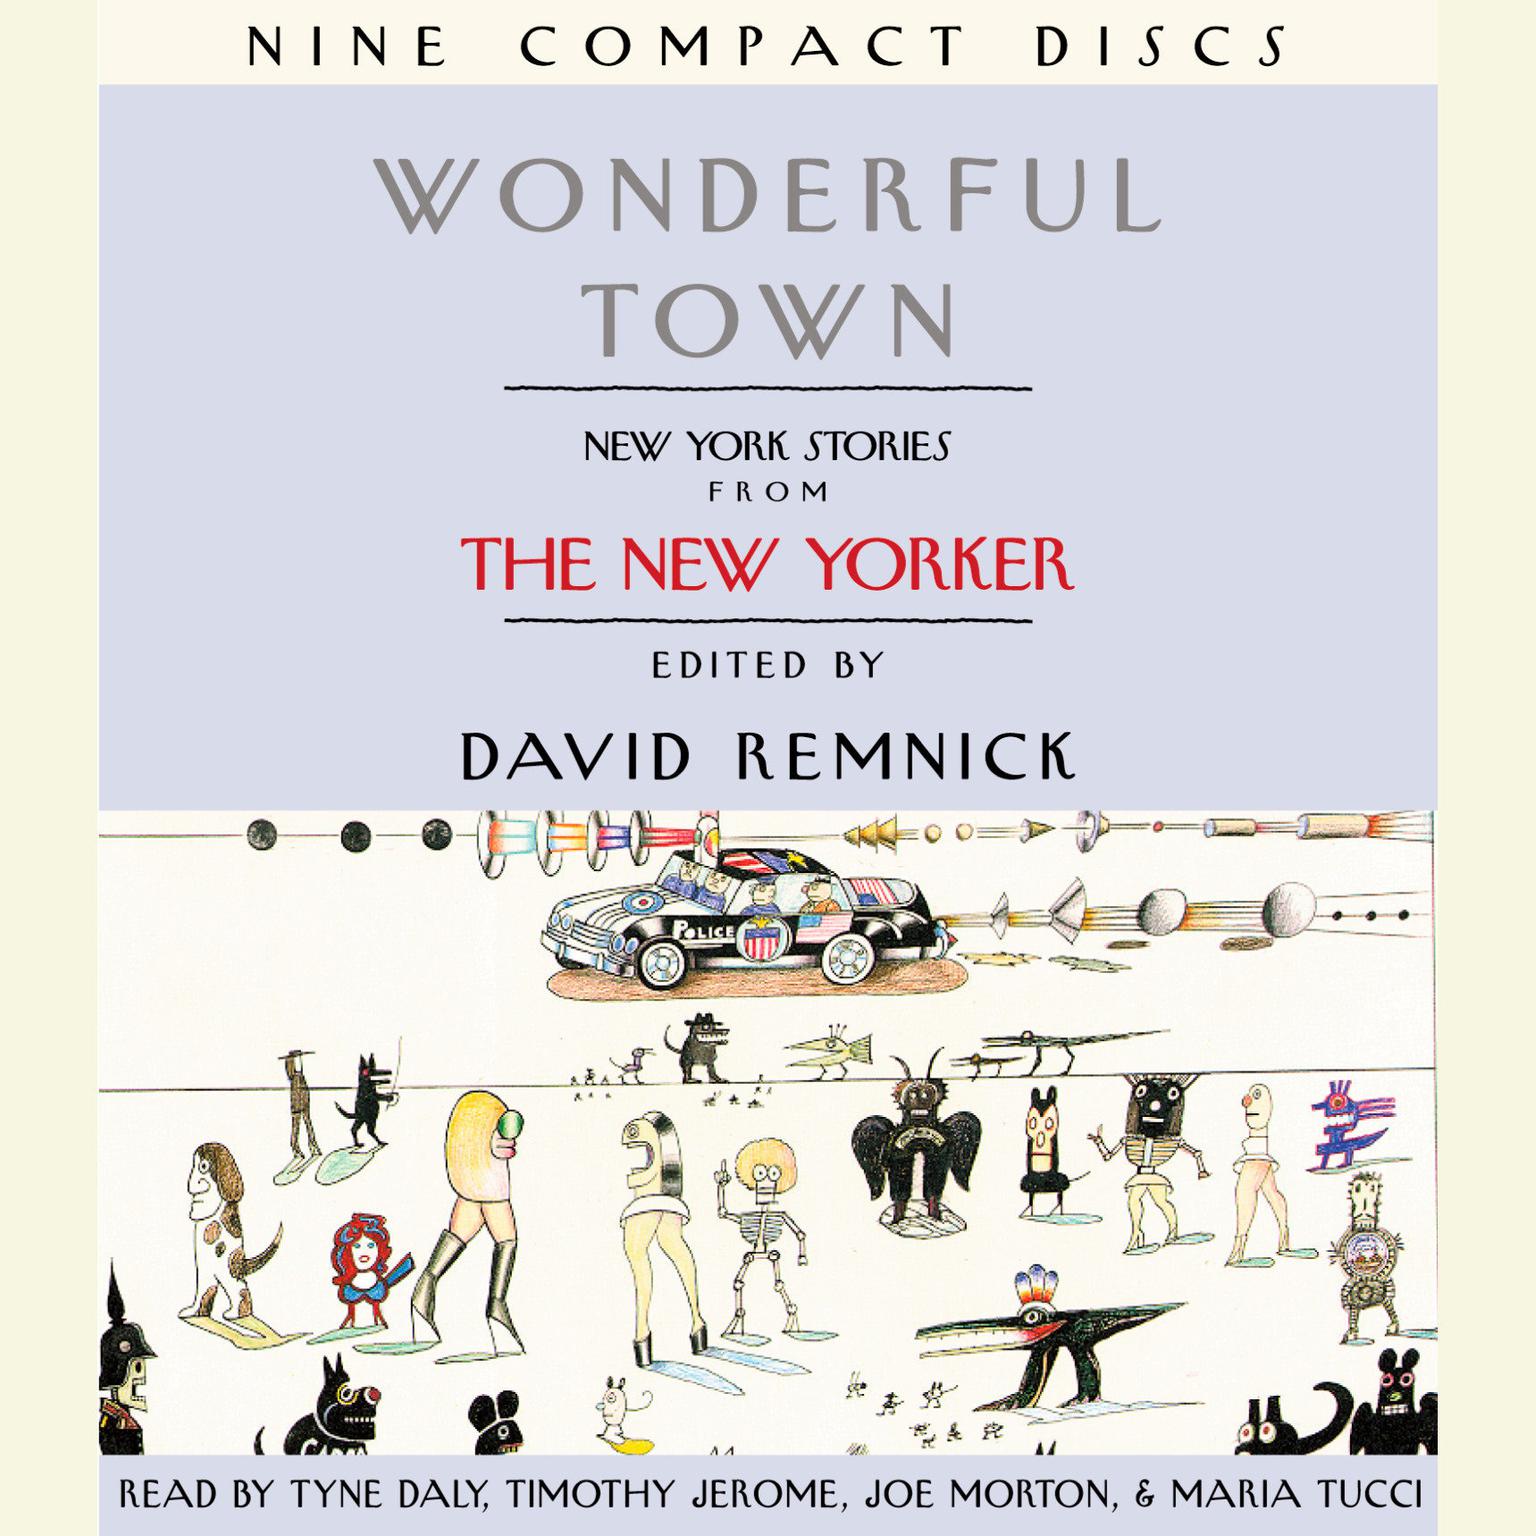 Wonderful Town (Abridged): New York Stories from The New Yorker Audiobook, by David Remnick